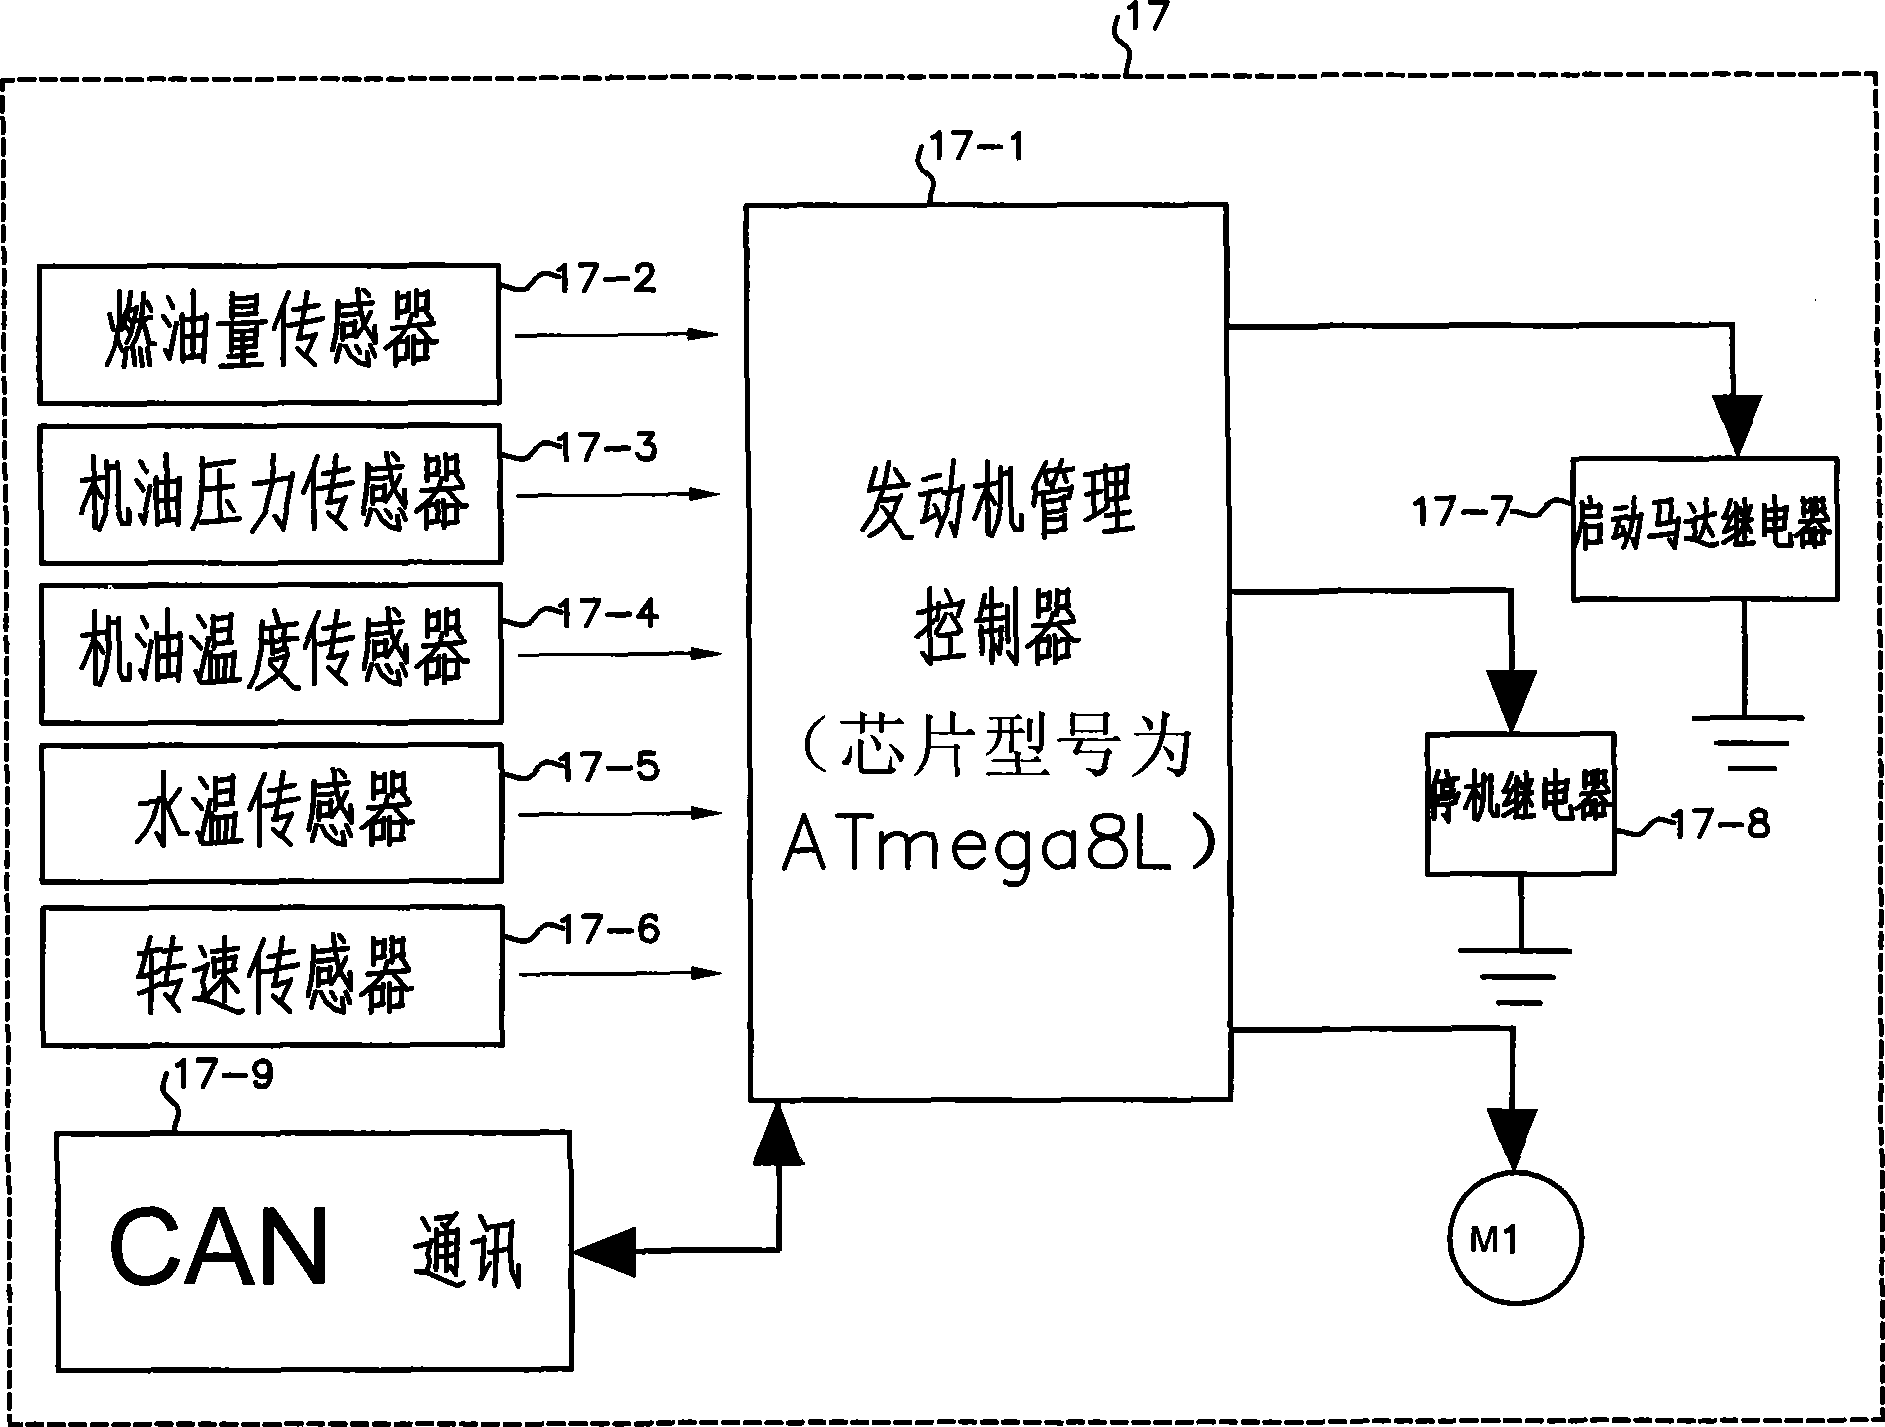 Mixing DC power supply control system for communication base station